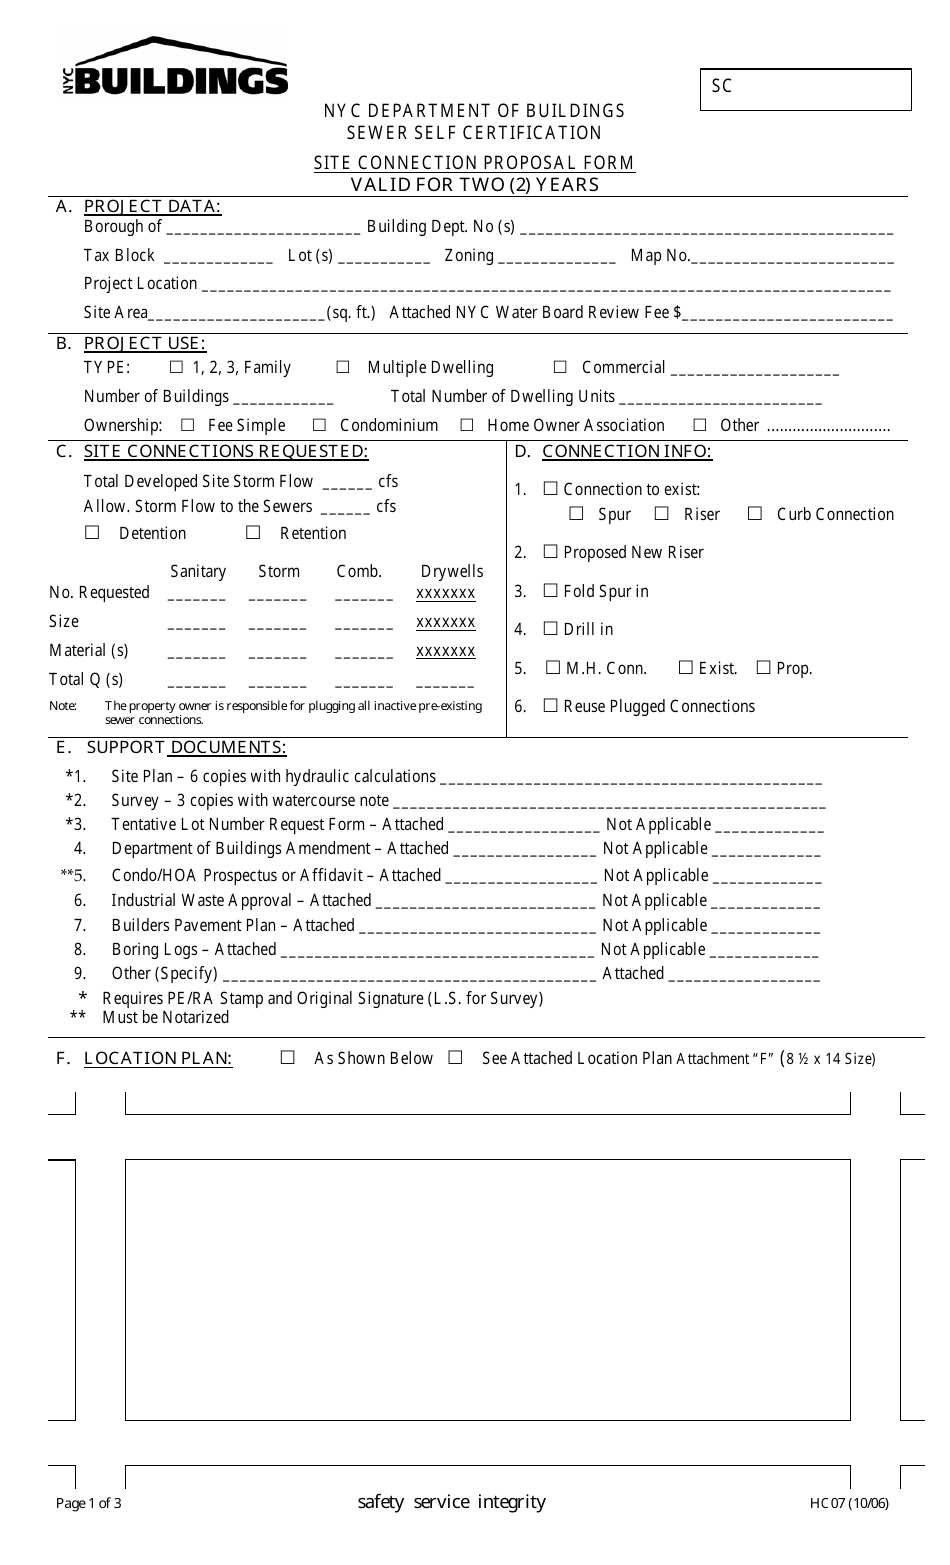 Form HC07 Site Connection Proposal Form - New York City, Page 1